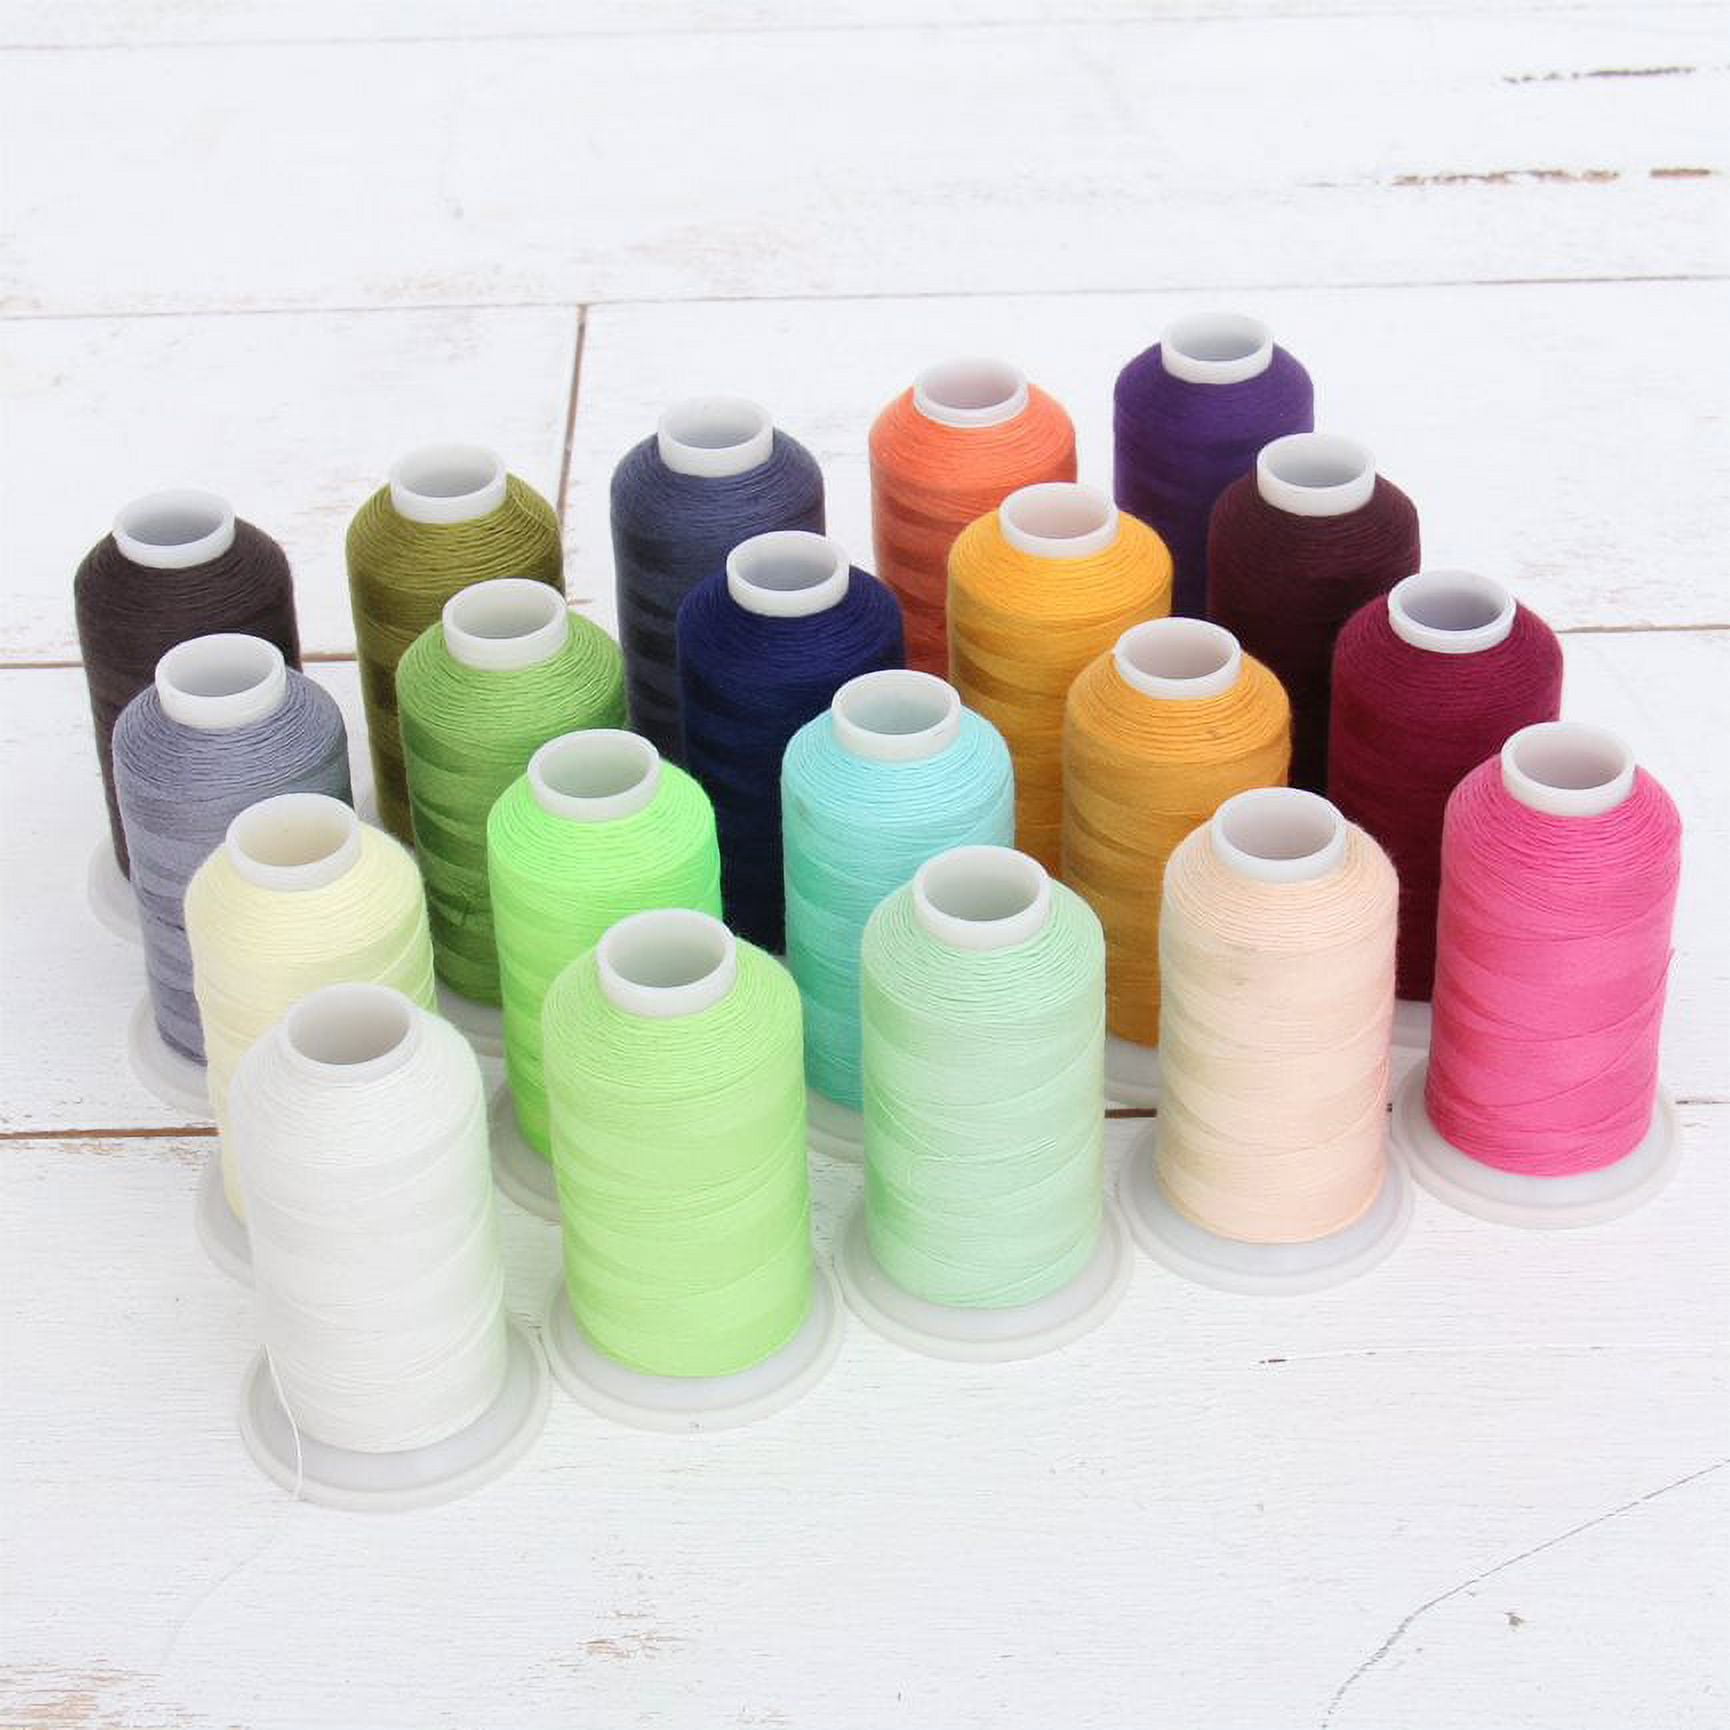 Polyester All-Purpose Sewing Thread 11 Cone Neutral Shades Set - 600m Cones  - Strong Lint Free Spun Polyester - 50S/3 Weight 